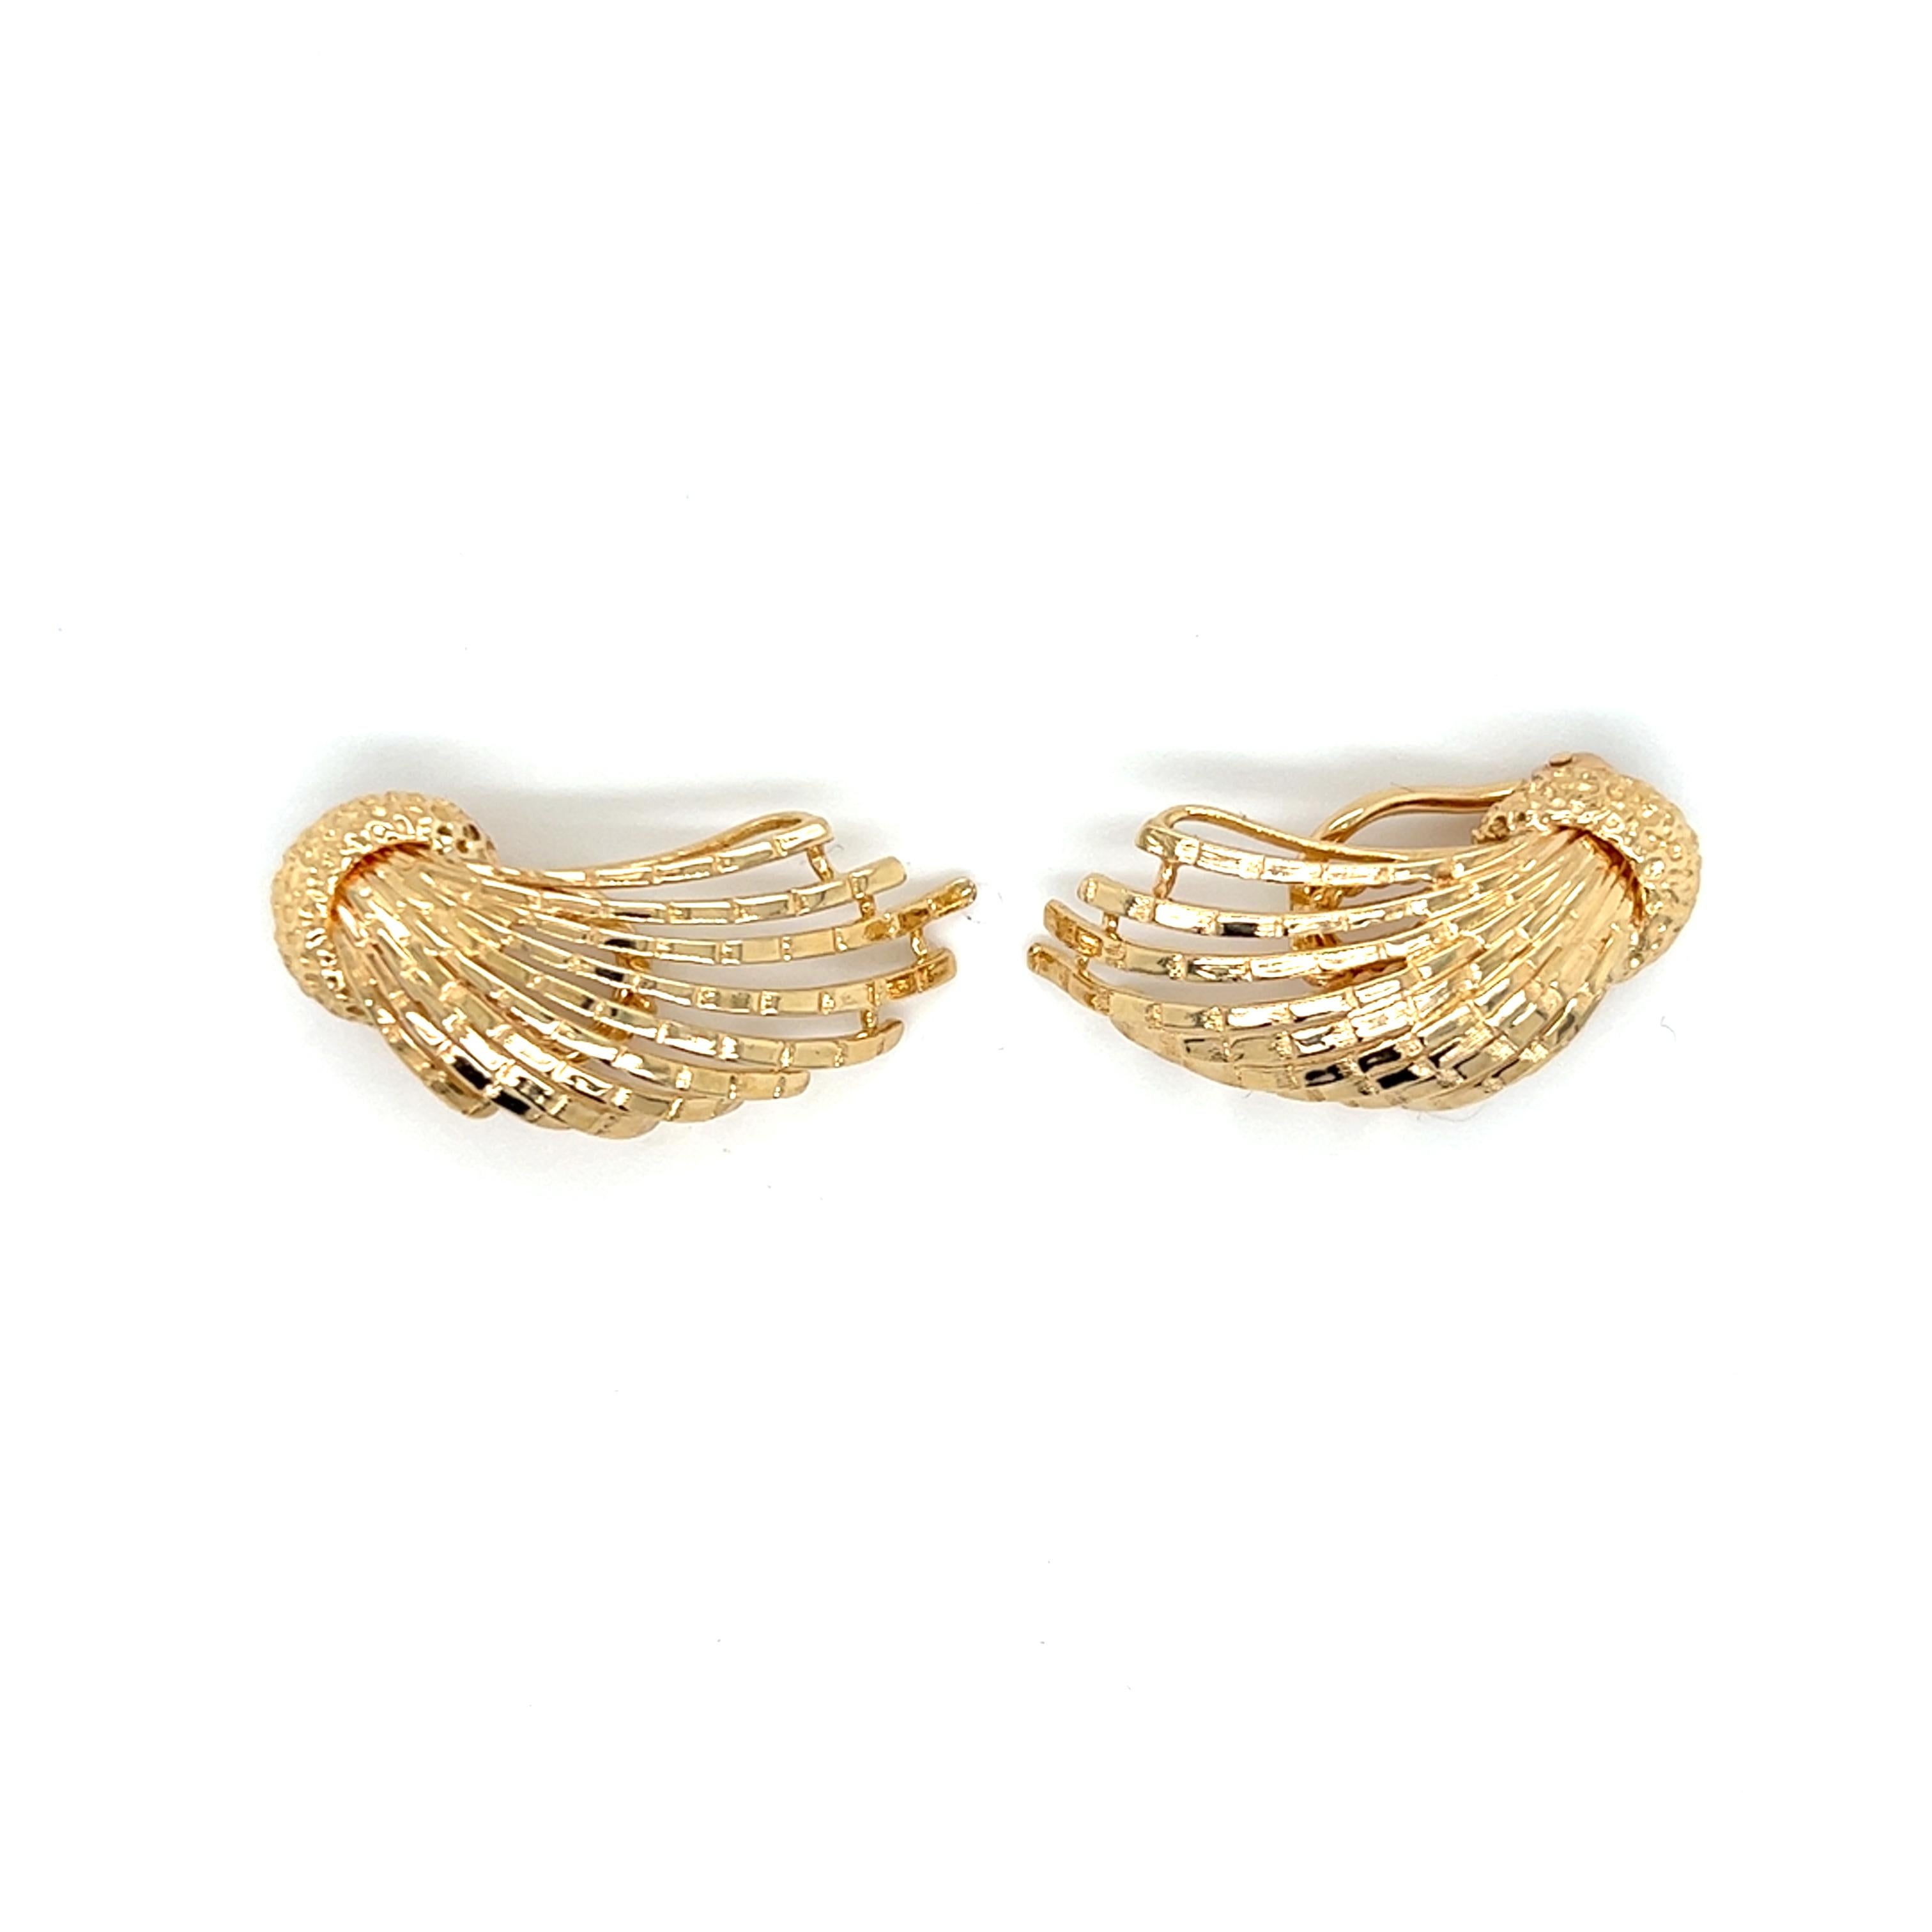 One pair of 14 karat yellow gold spray design clip-on climber earrings by Dan Frere. The earrings are stamped with Dan Frere signature and copyright.  The earrings feature Omega backs, measure 1.25 inches long, and weigh 9.5 grams total weight.  